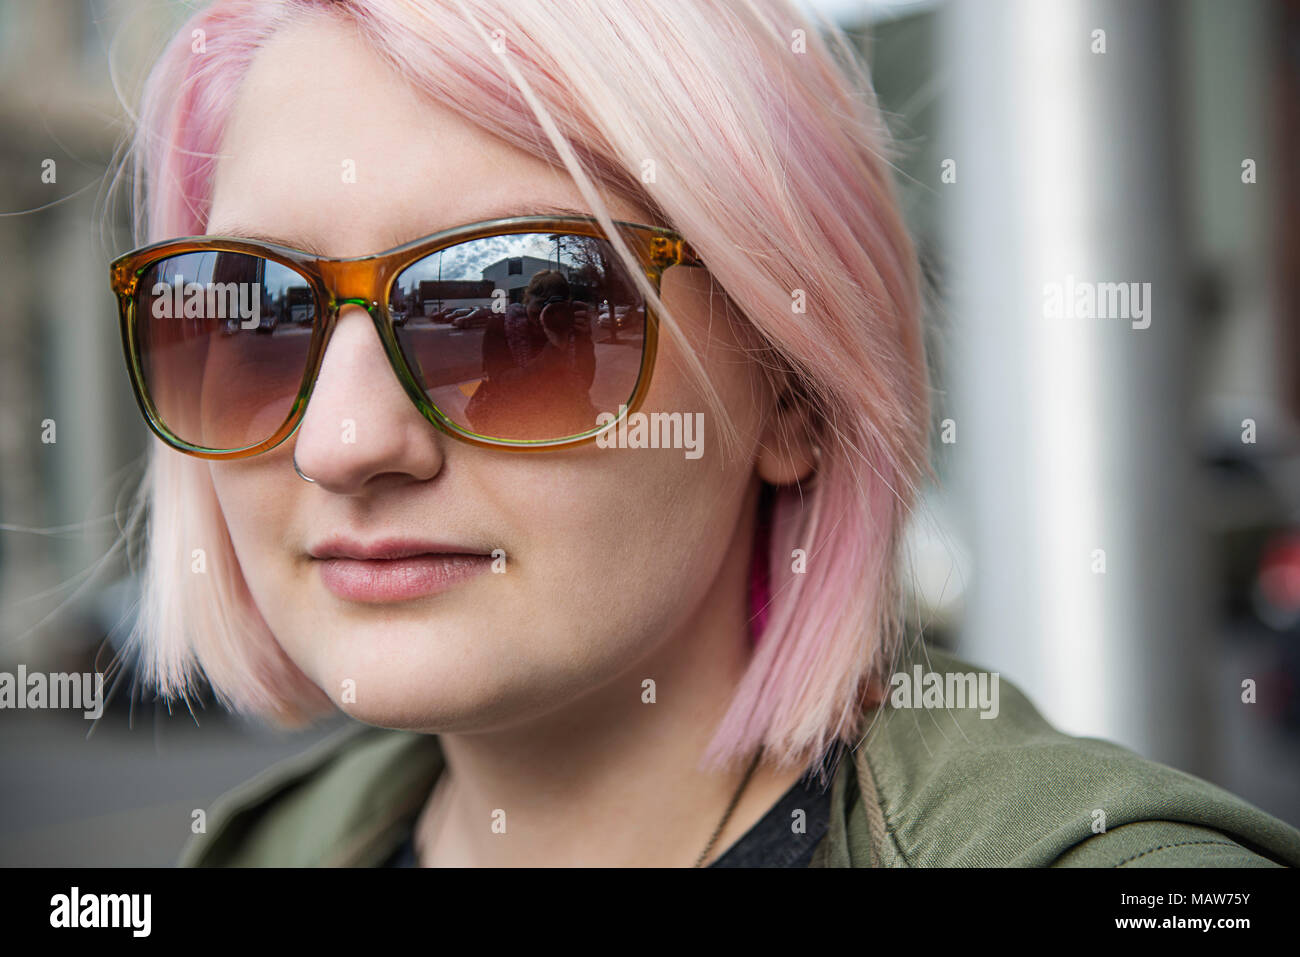 A young woman with pink hair and a nose ring. Stock Photo